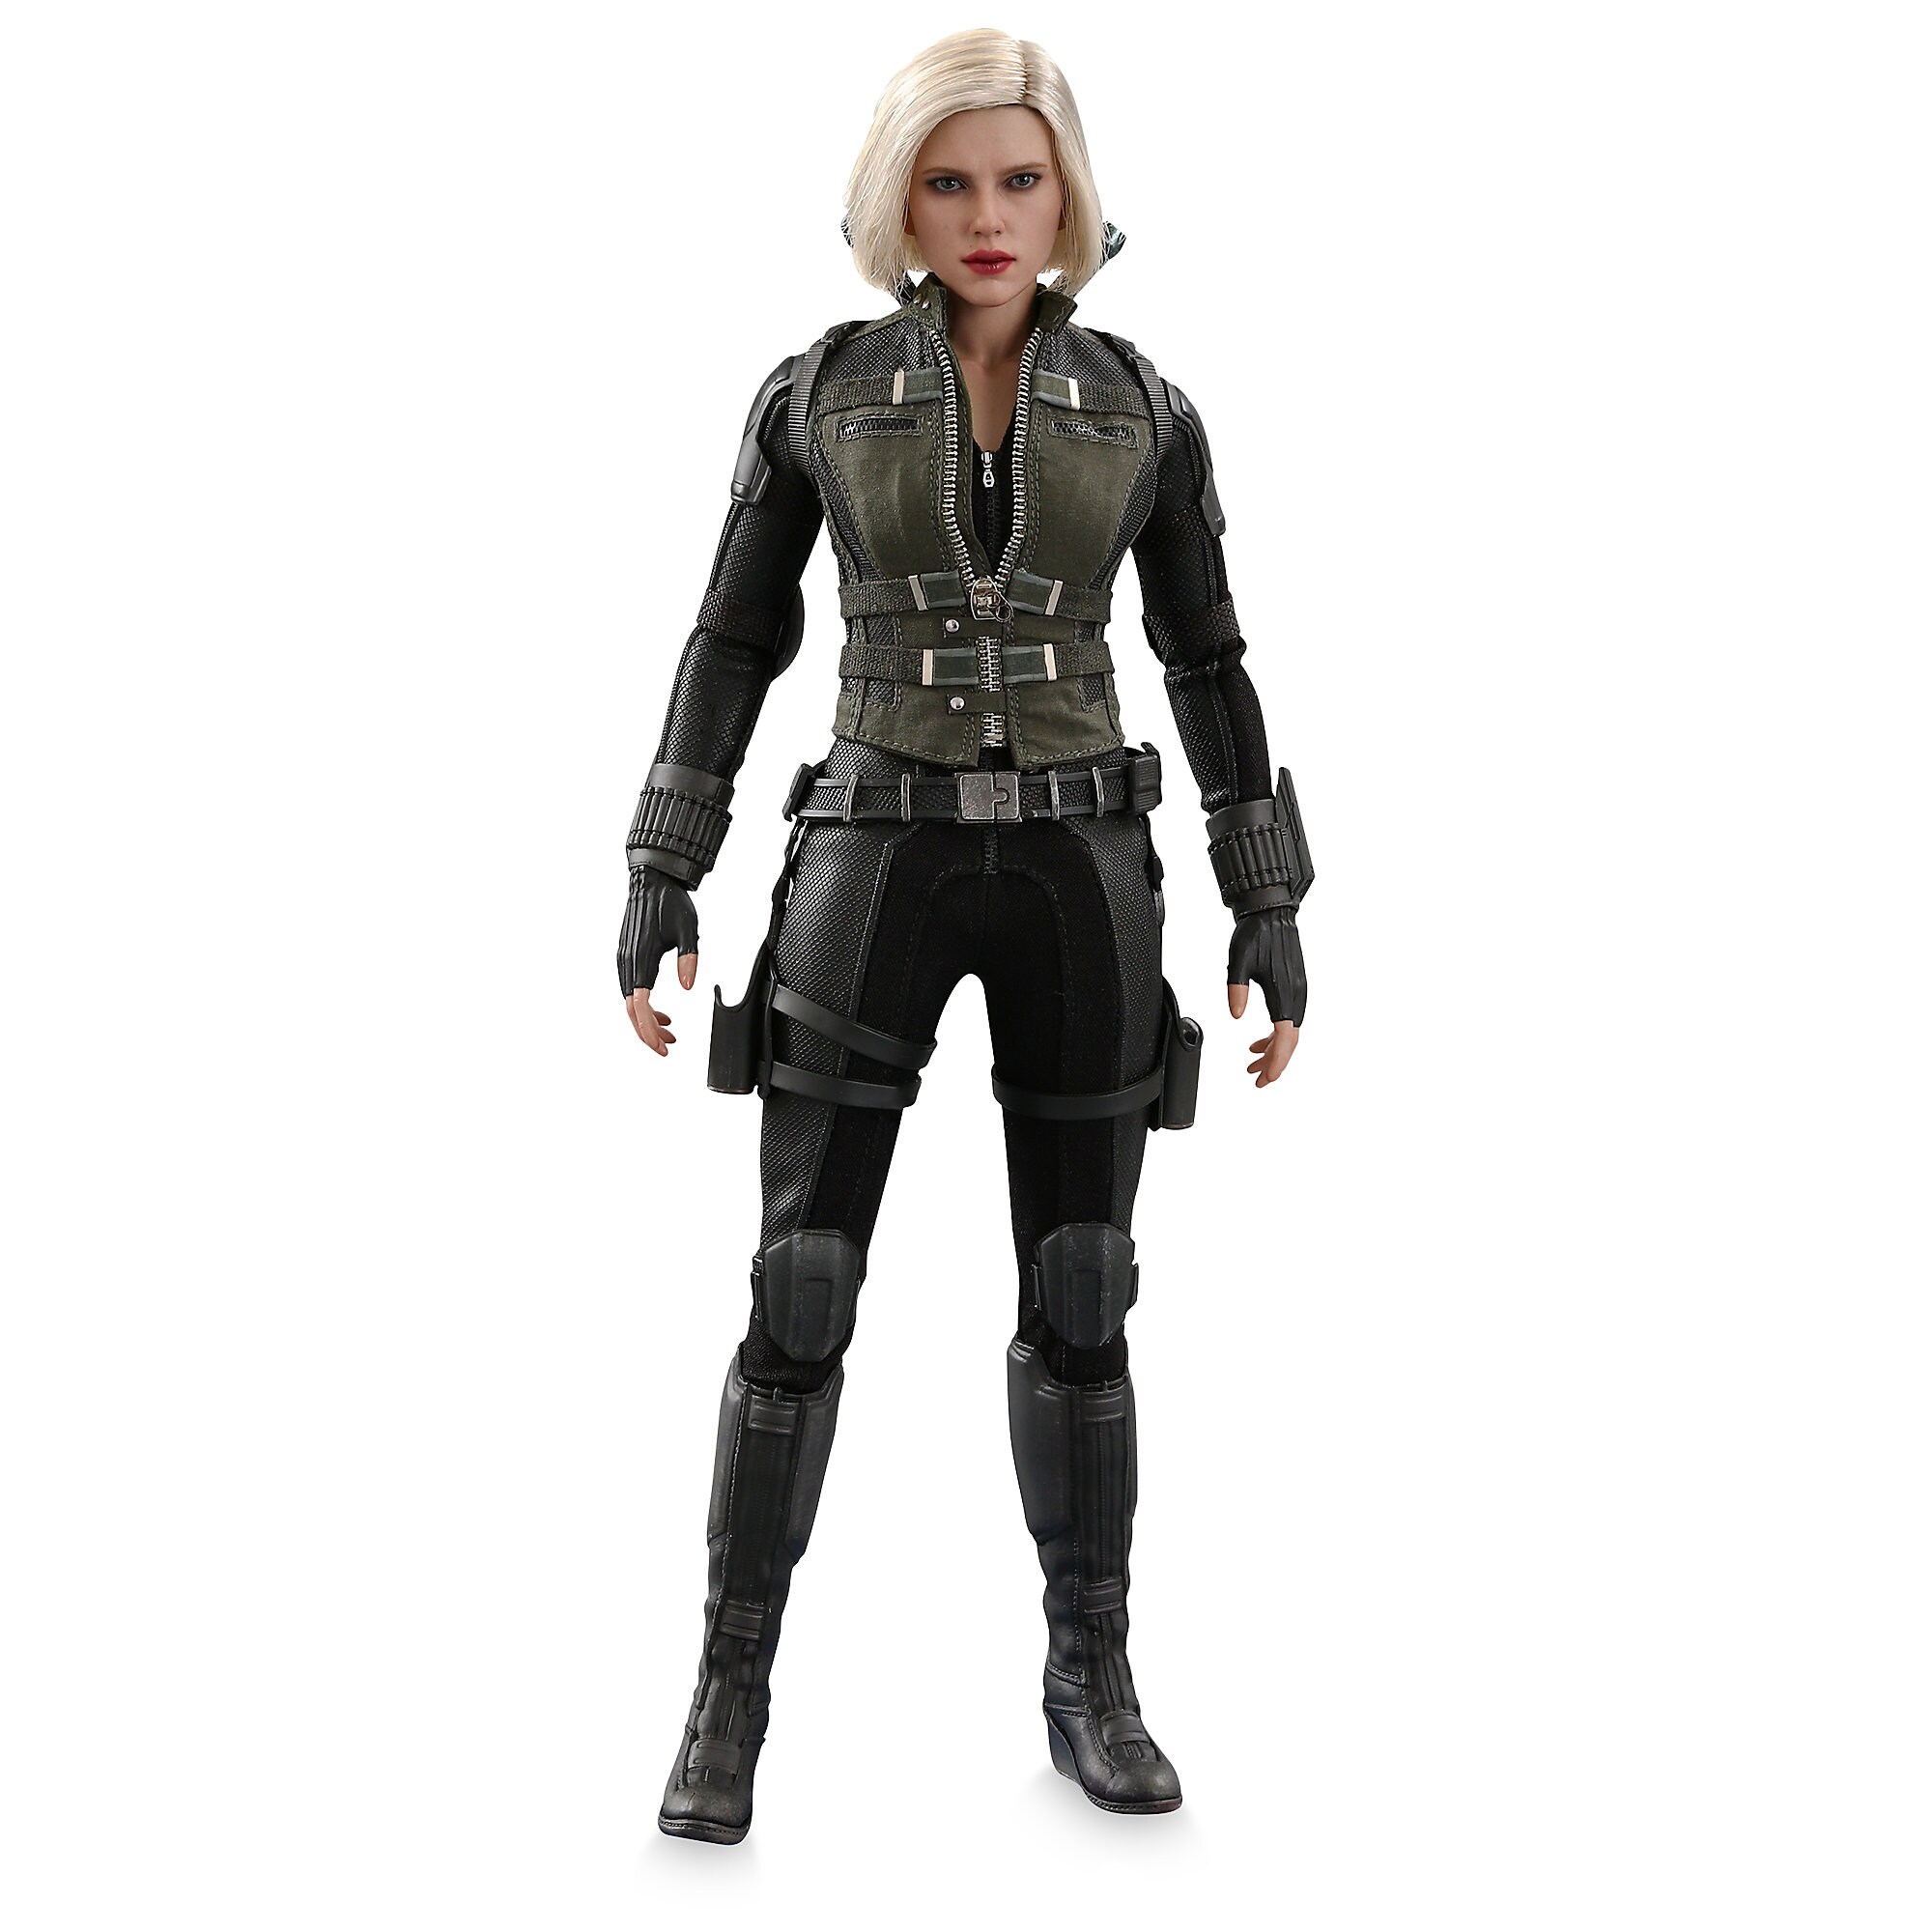 Black Widow Sixth Scale Figure by Hot Toys - Marvel's Avengers: Infinity War